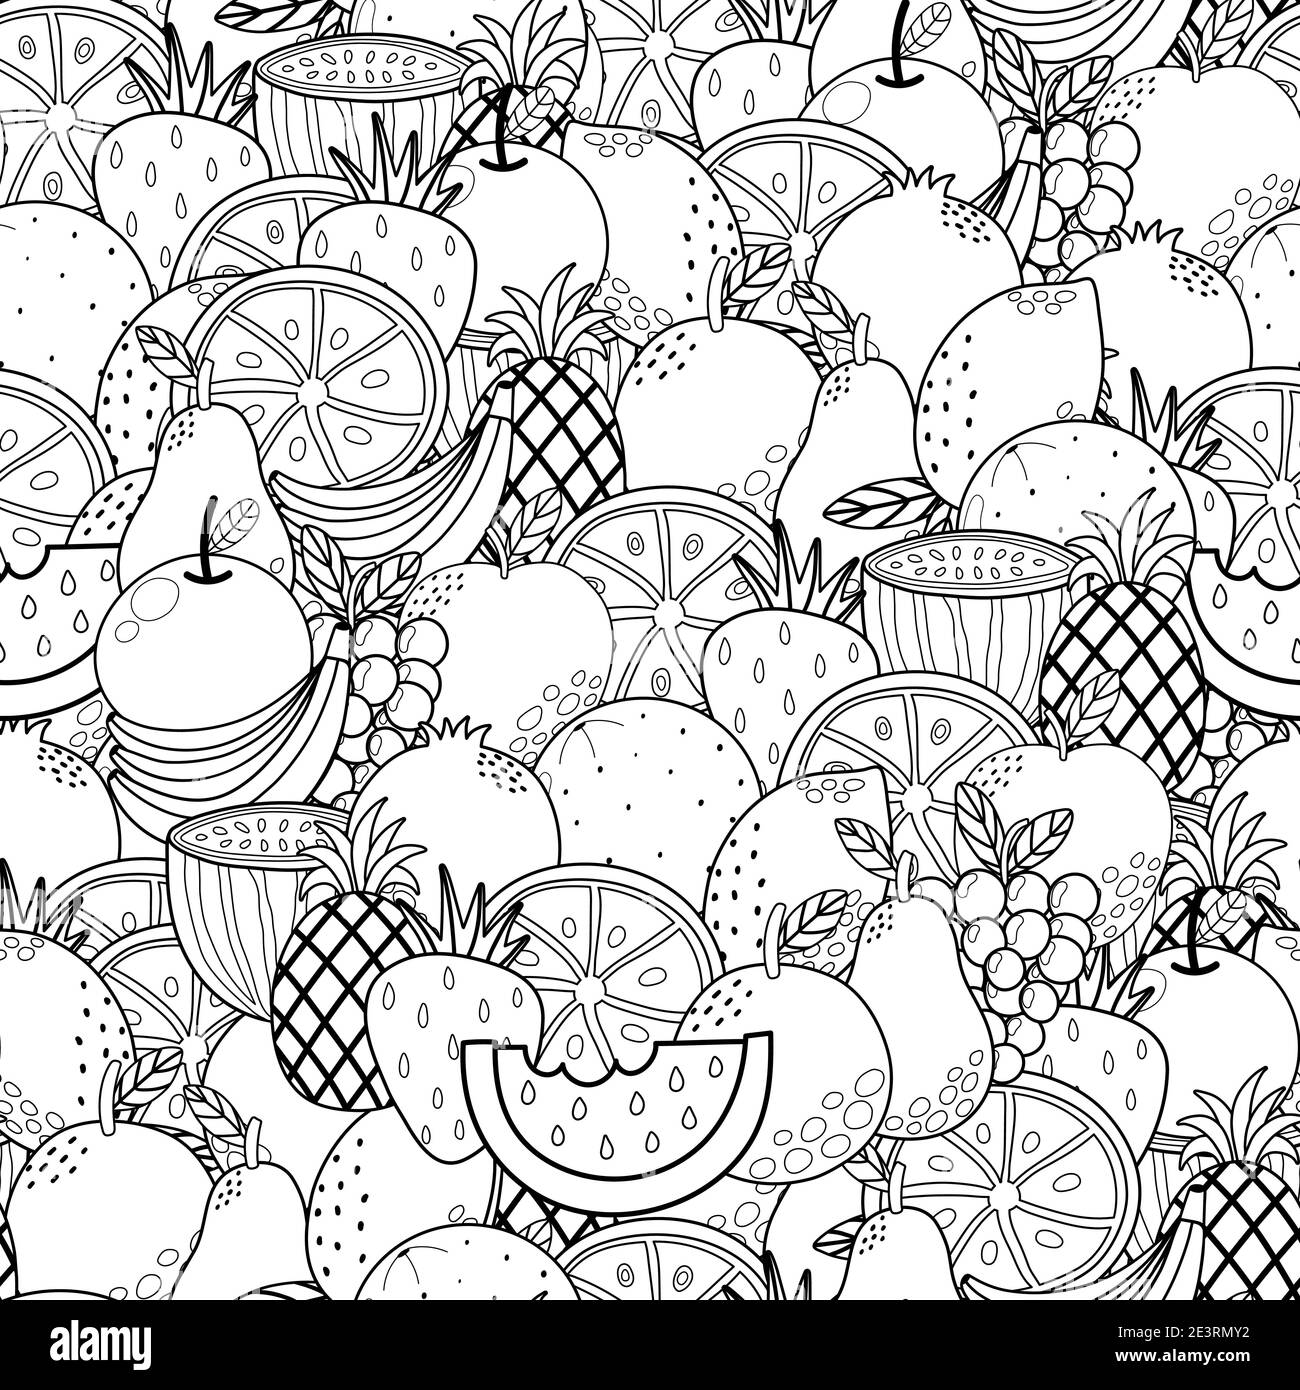 Doodle fruits black and white seamless pattern. Healthy food coloring page Stock Vector